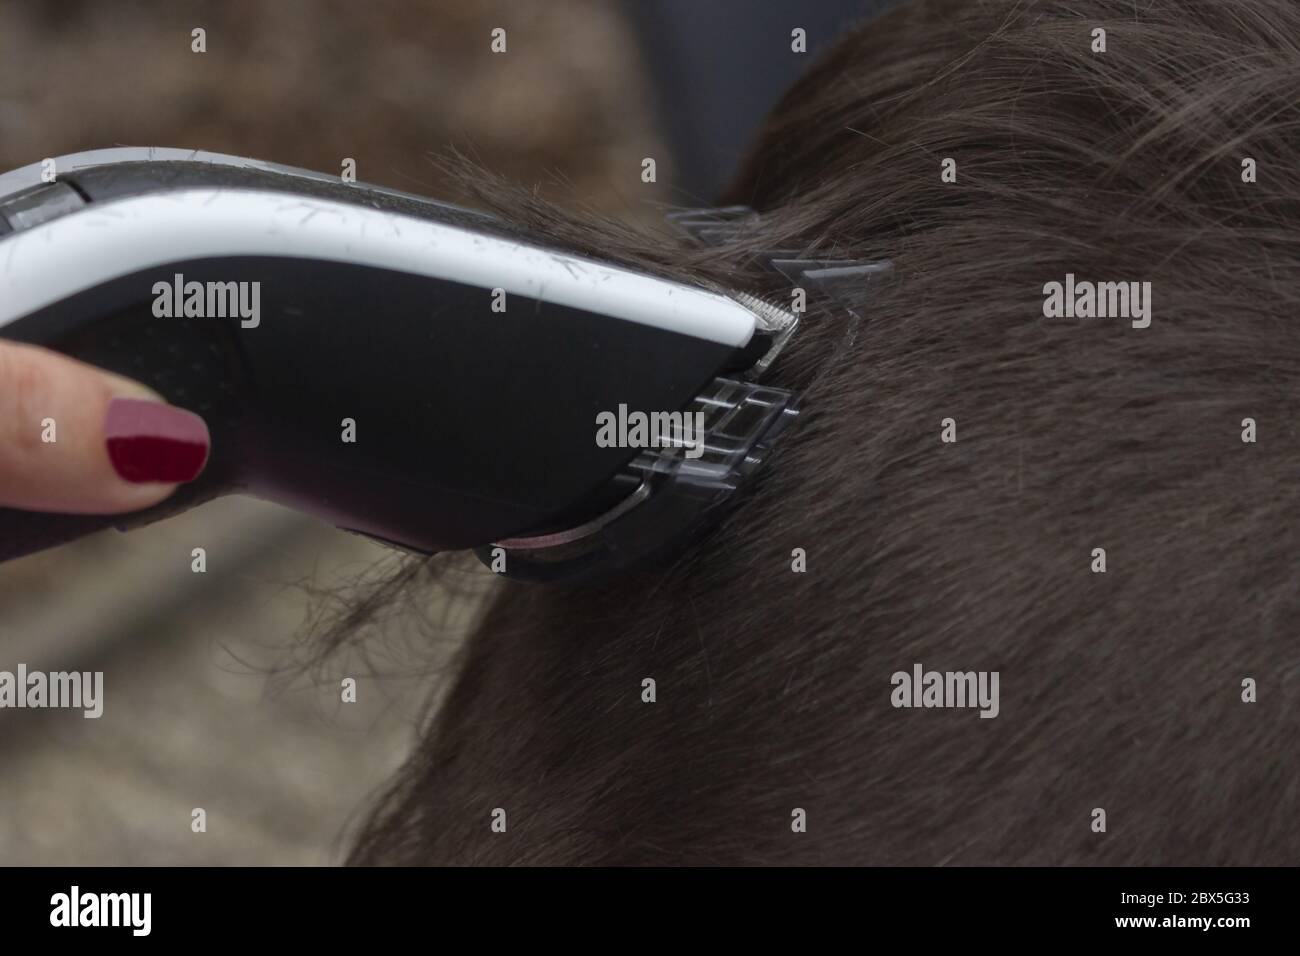 Detail of a haircut by a hairdresser. The hairdresser holds in hand a electric razor. Stock Photo